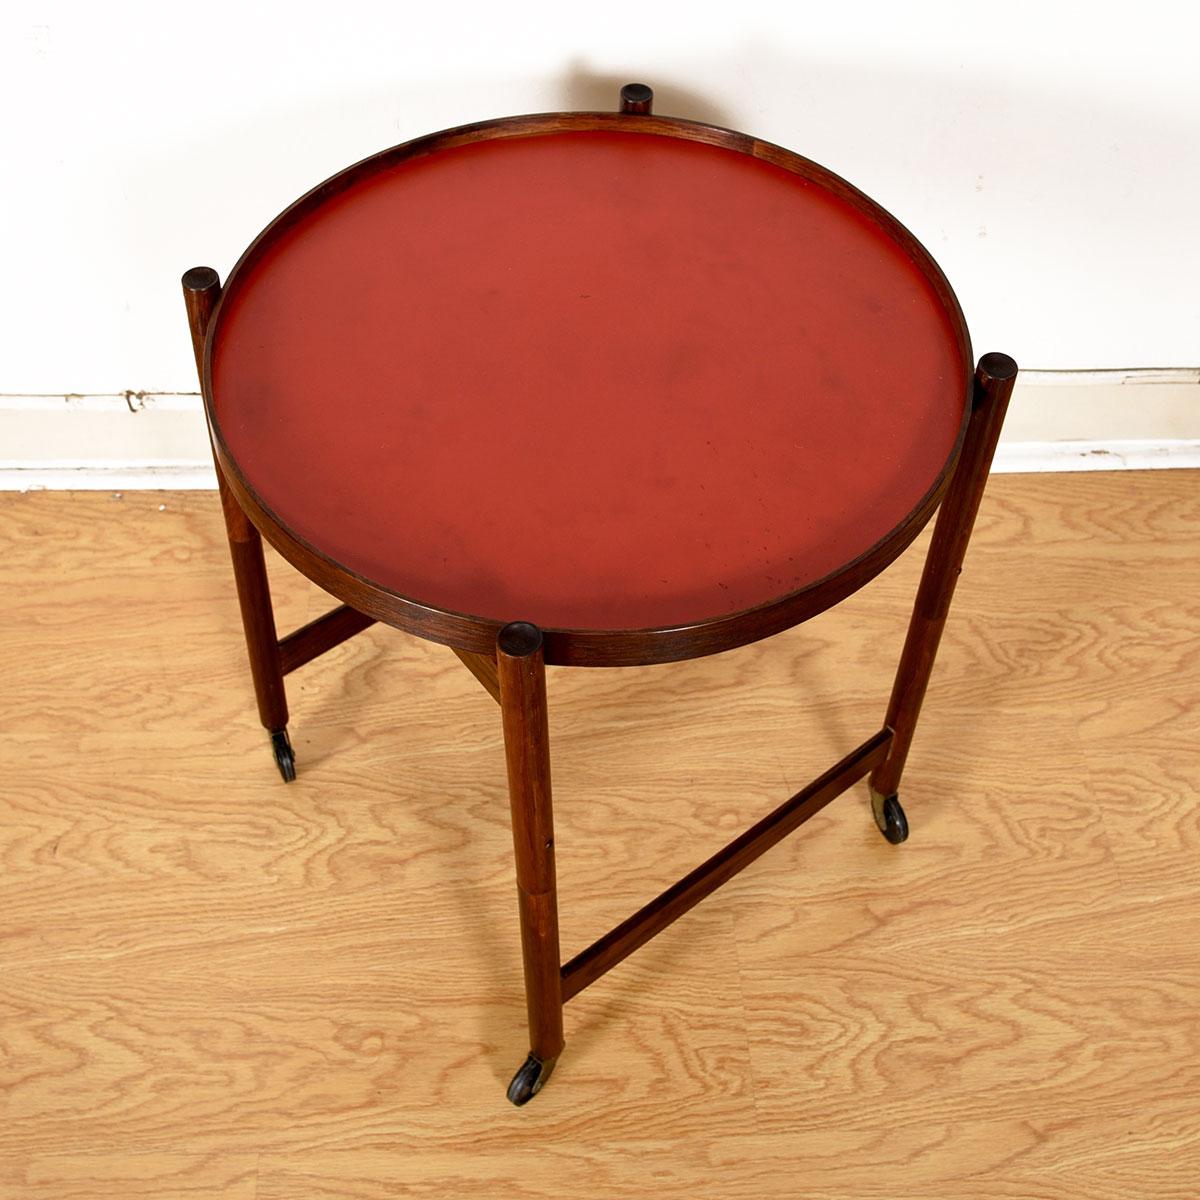 Danish Rosewood Collapsable Frame fliptop Accent Table

Additional information:
Material: Rosewood
Featured at Kensington

Dimension: W 20 x D 22 x H 22.